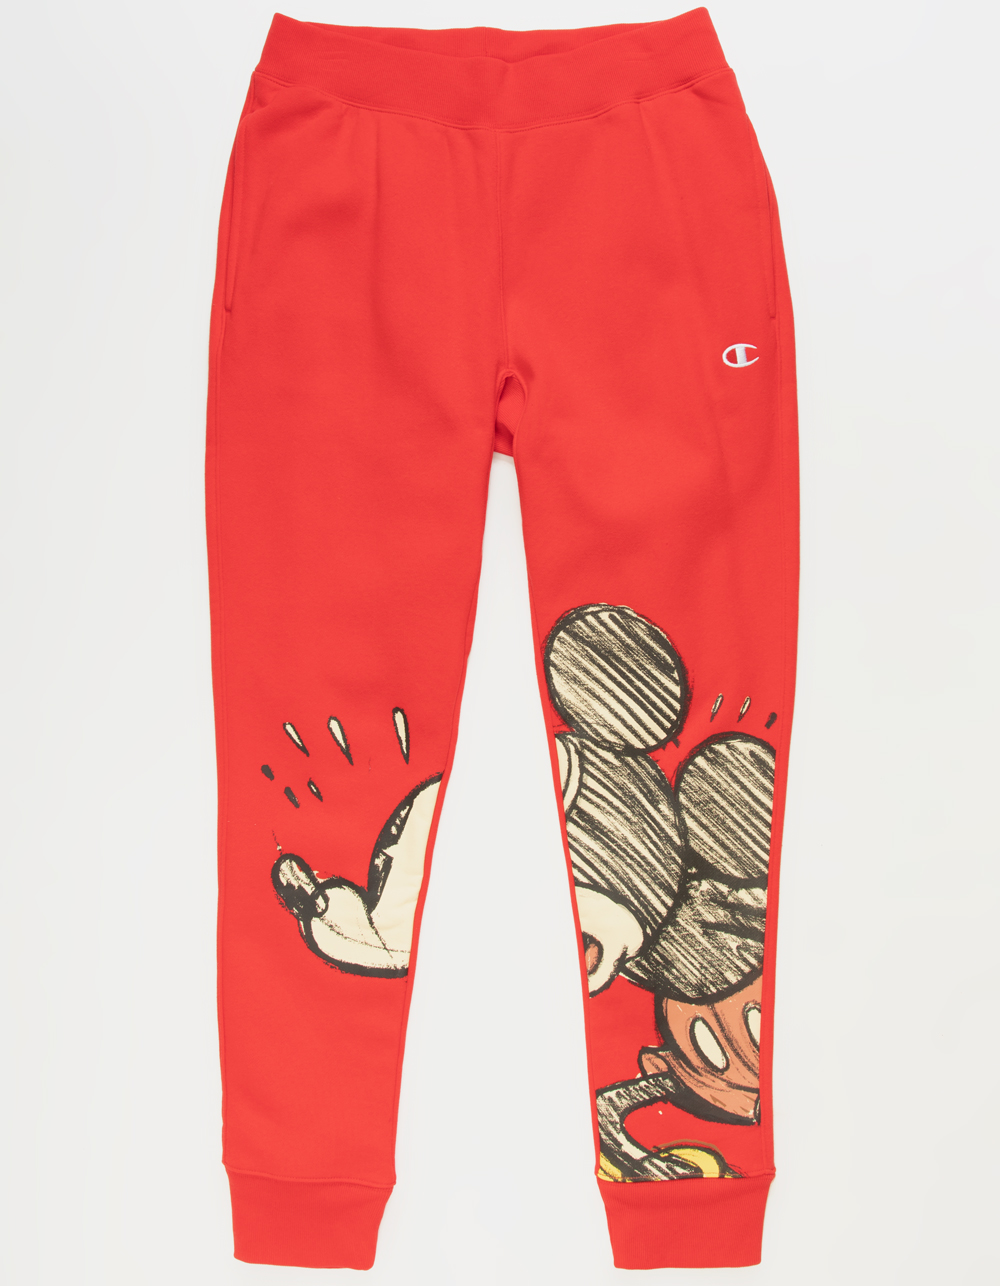 CHAMPION x Disney Mickey Mouse Reverse Weave Mens Sweatpants - RED